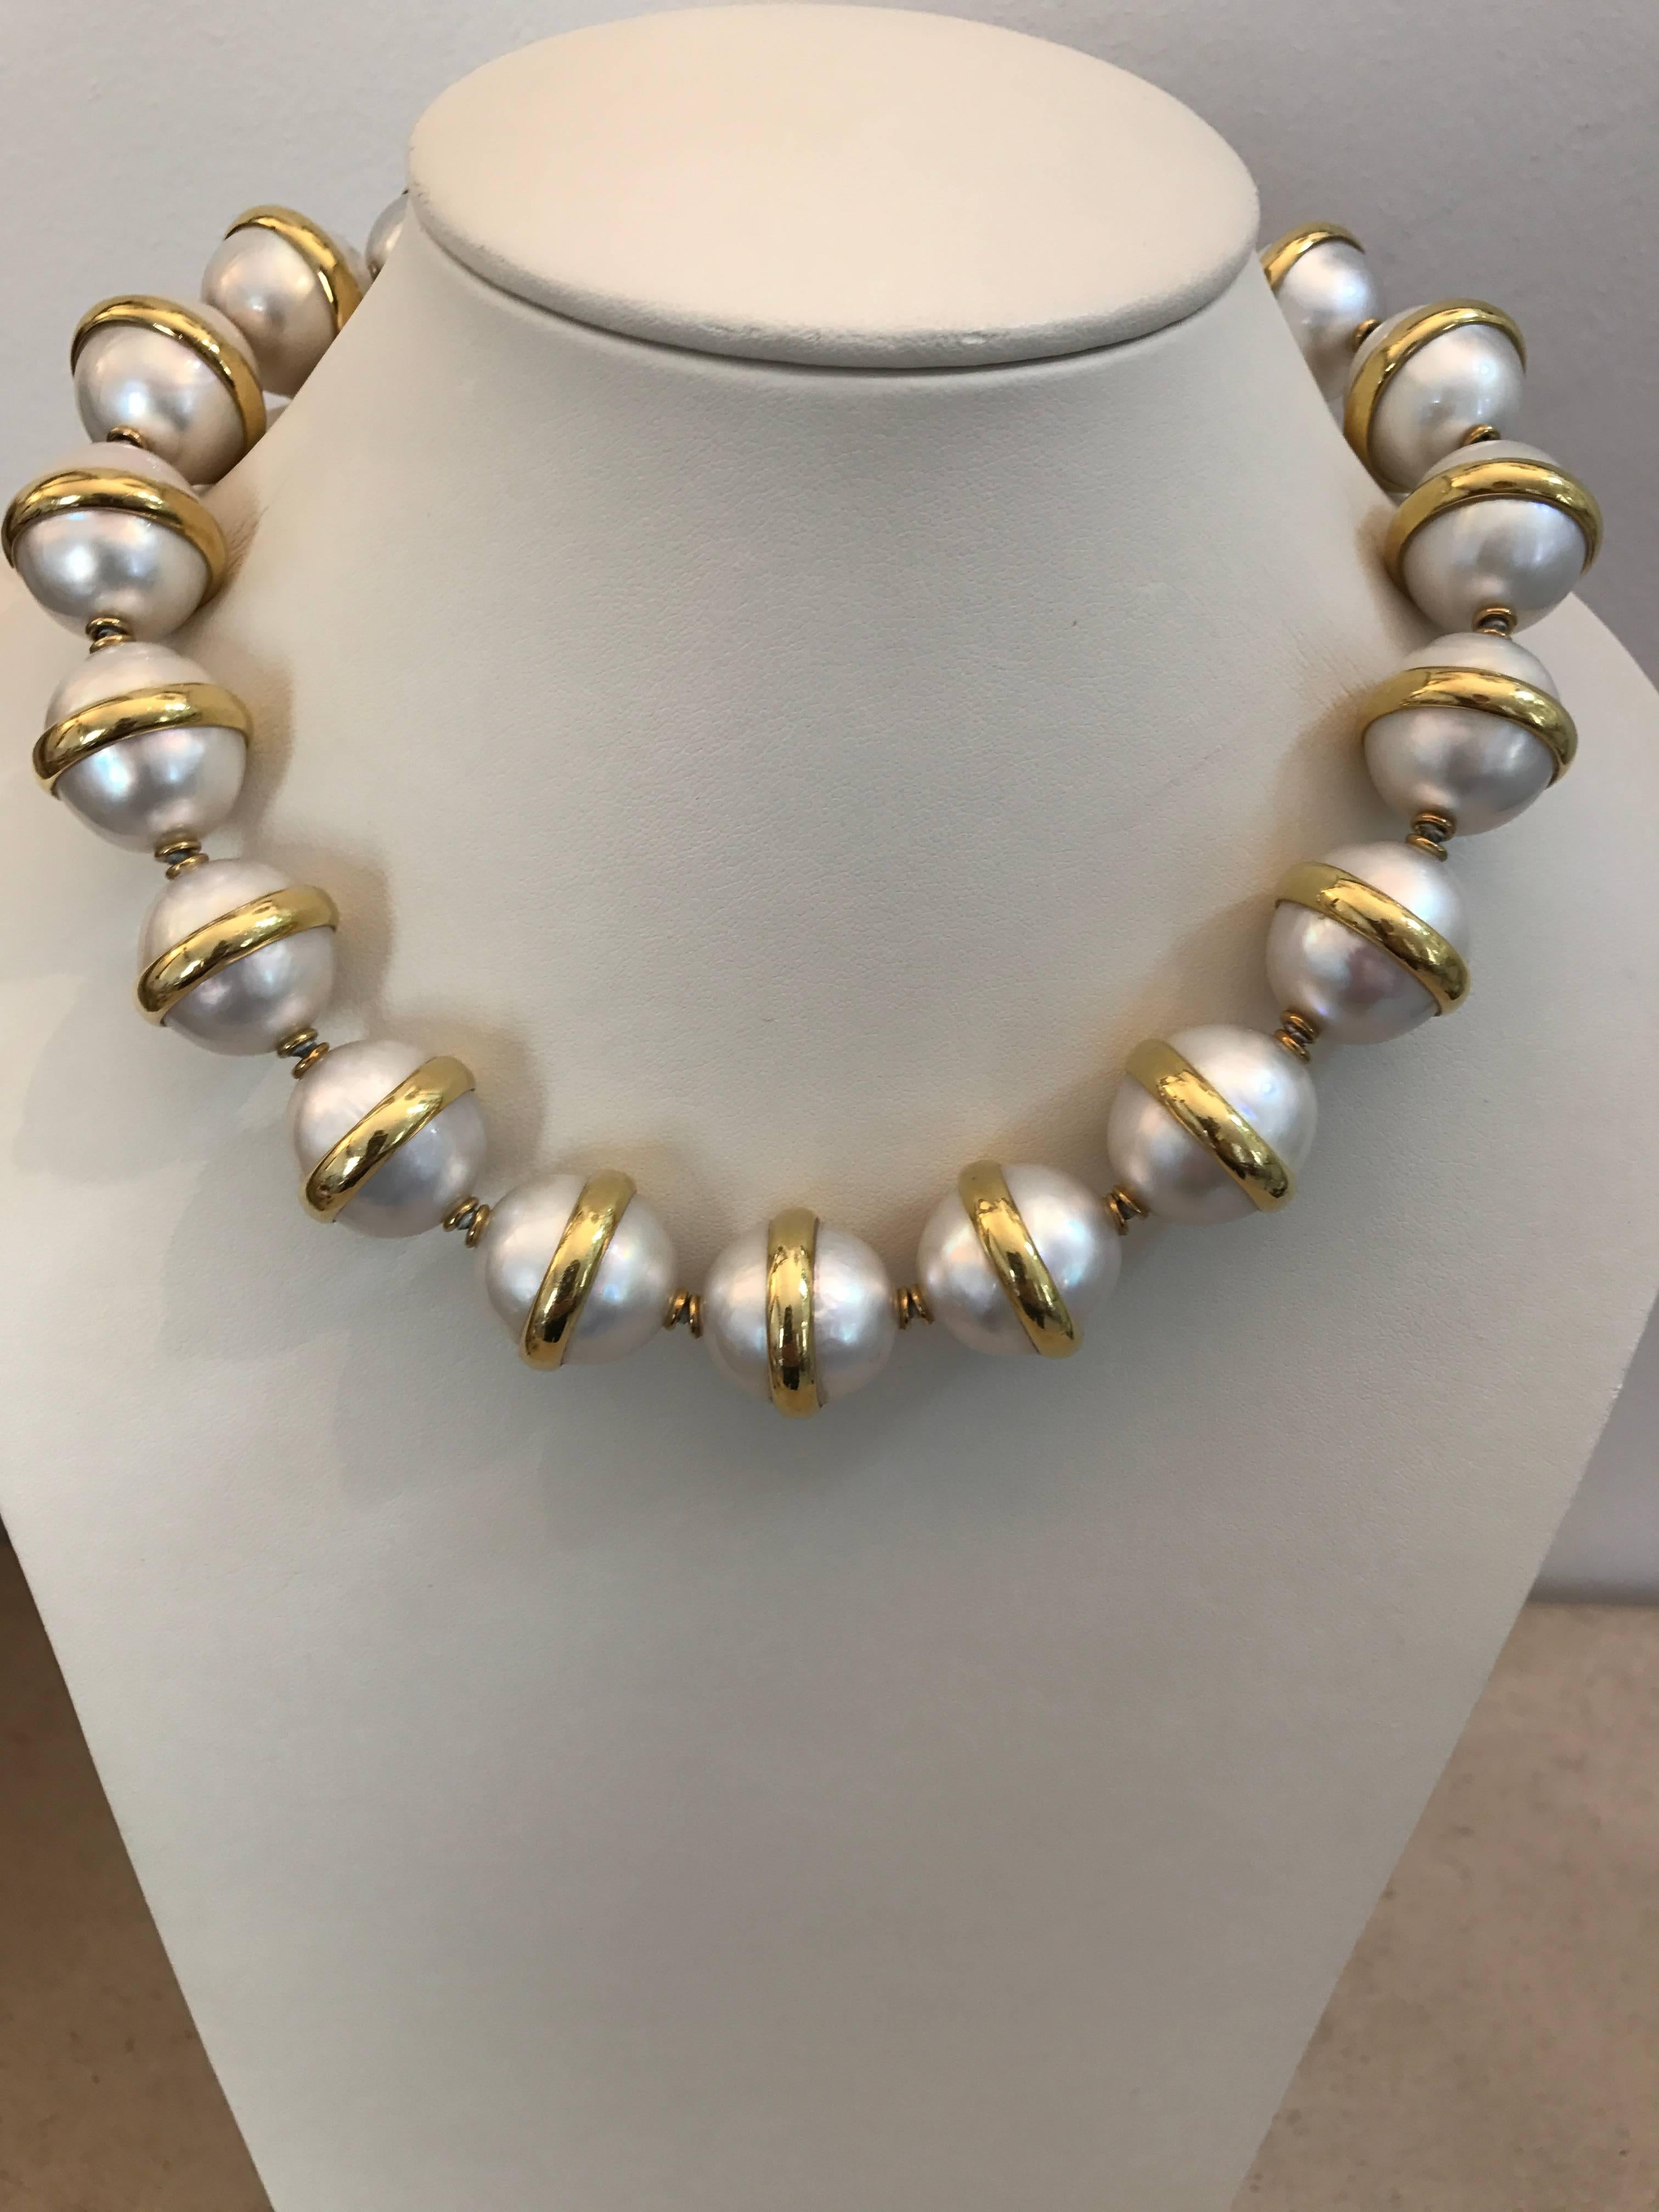 A magnificent 18ct yellow gold and mabe pearl Planet necklace signed by Paloma Picasso for Tiffany & Co. 1981.  Designed as twenty sections of two 18mm mabe pearls joined by 18ct gold rings

Overall length of necklace 44.5cms approximately